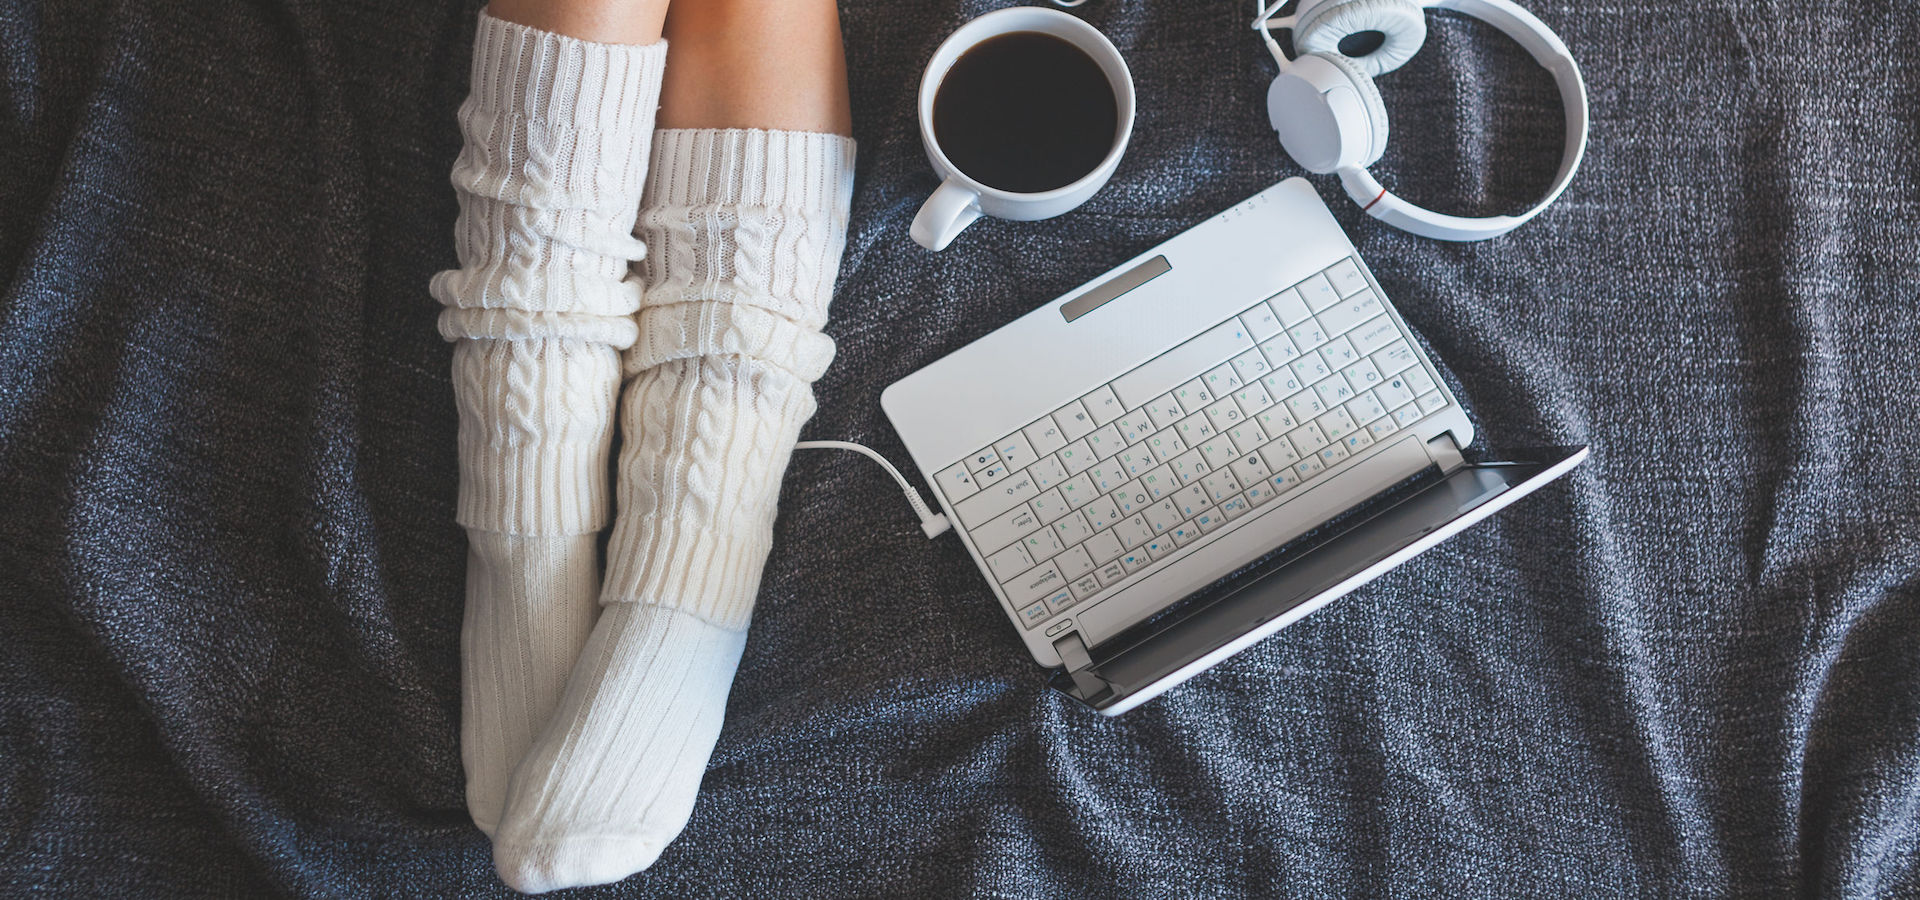 Top view of a woman's feet with a laptop, headphones and cup of coffee